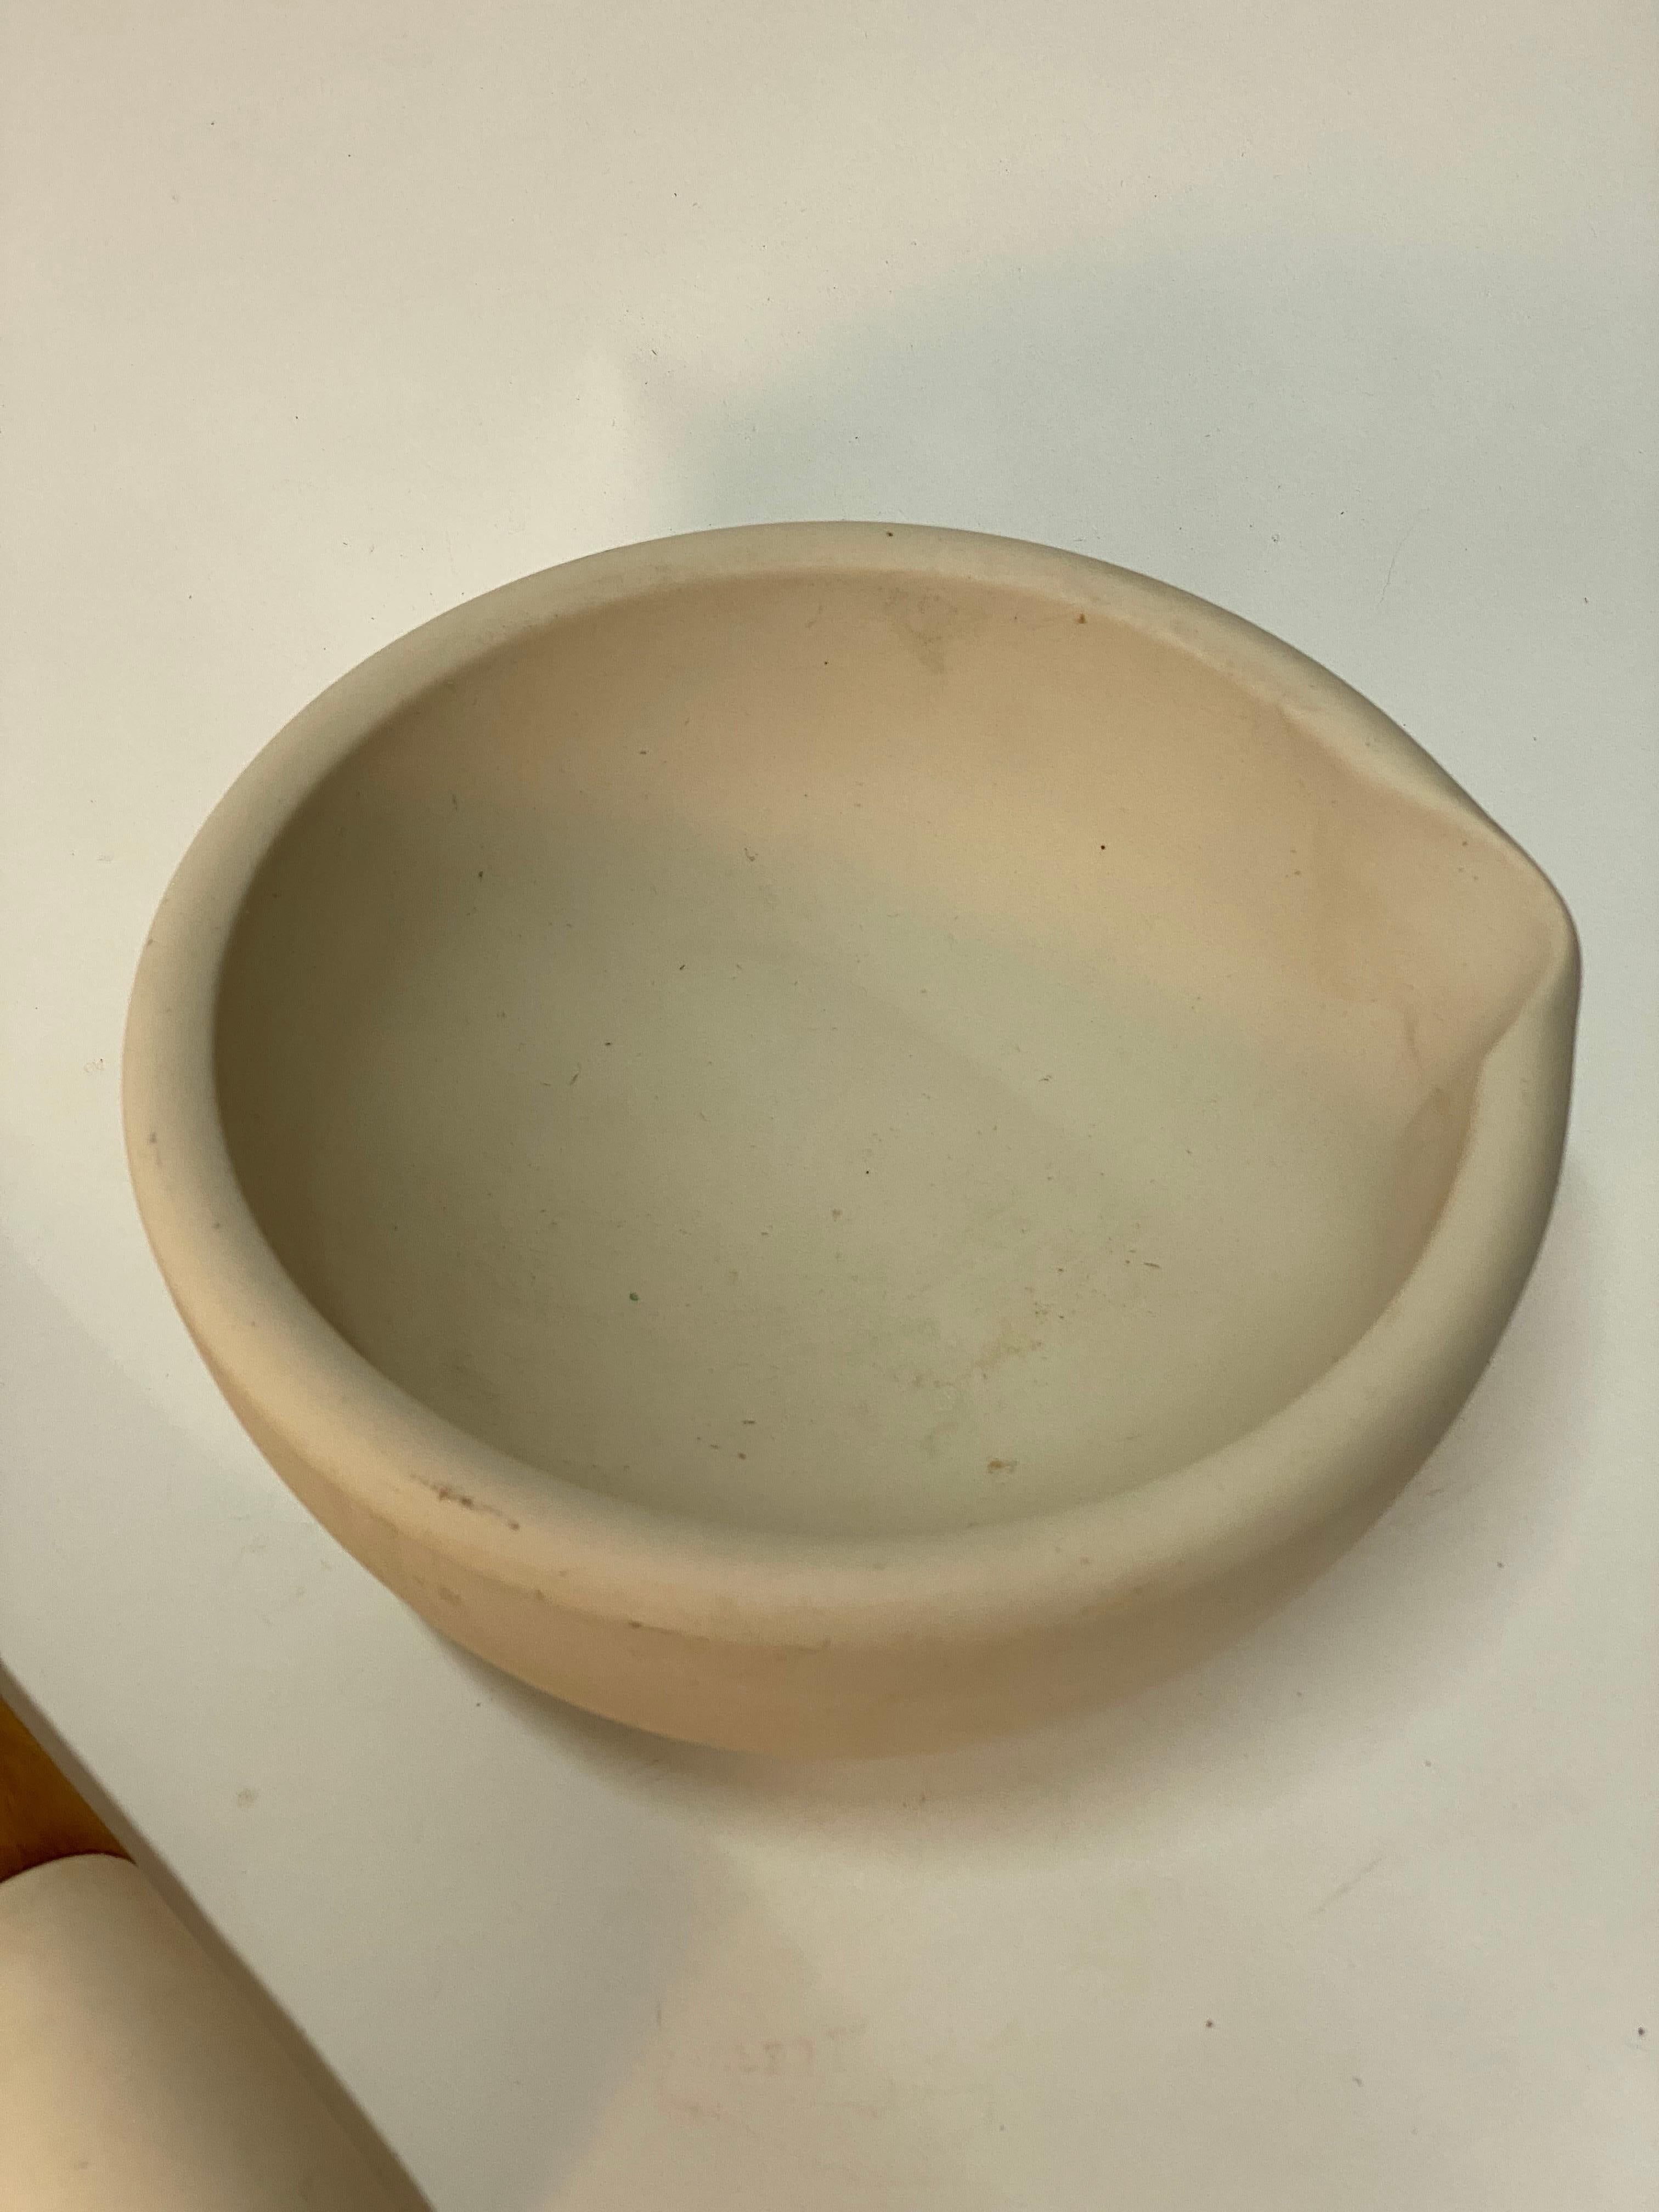 English Porcelain Mortar and Pestle #7 For Sale 4